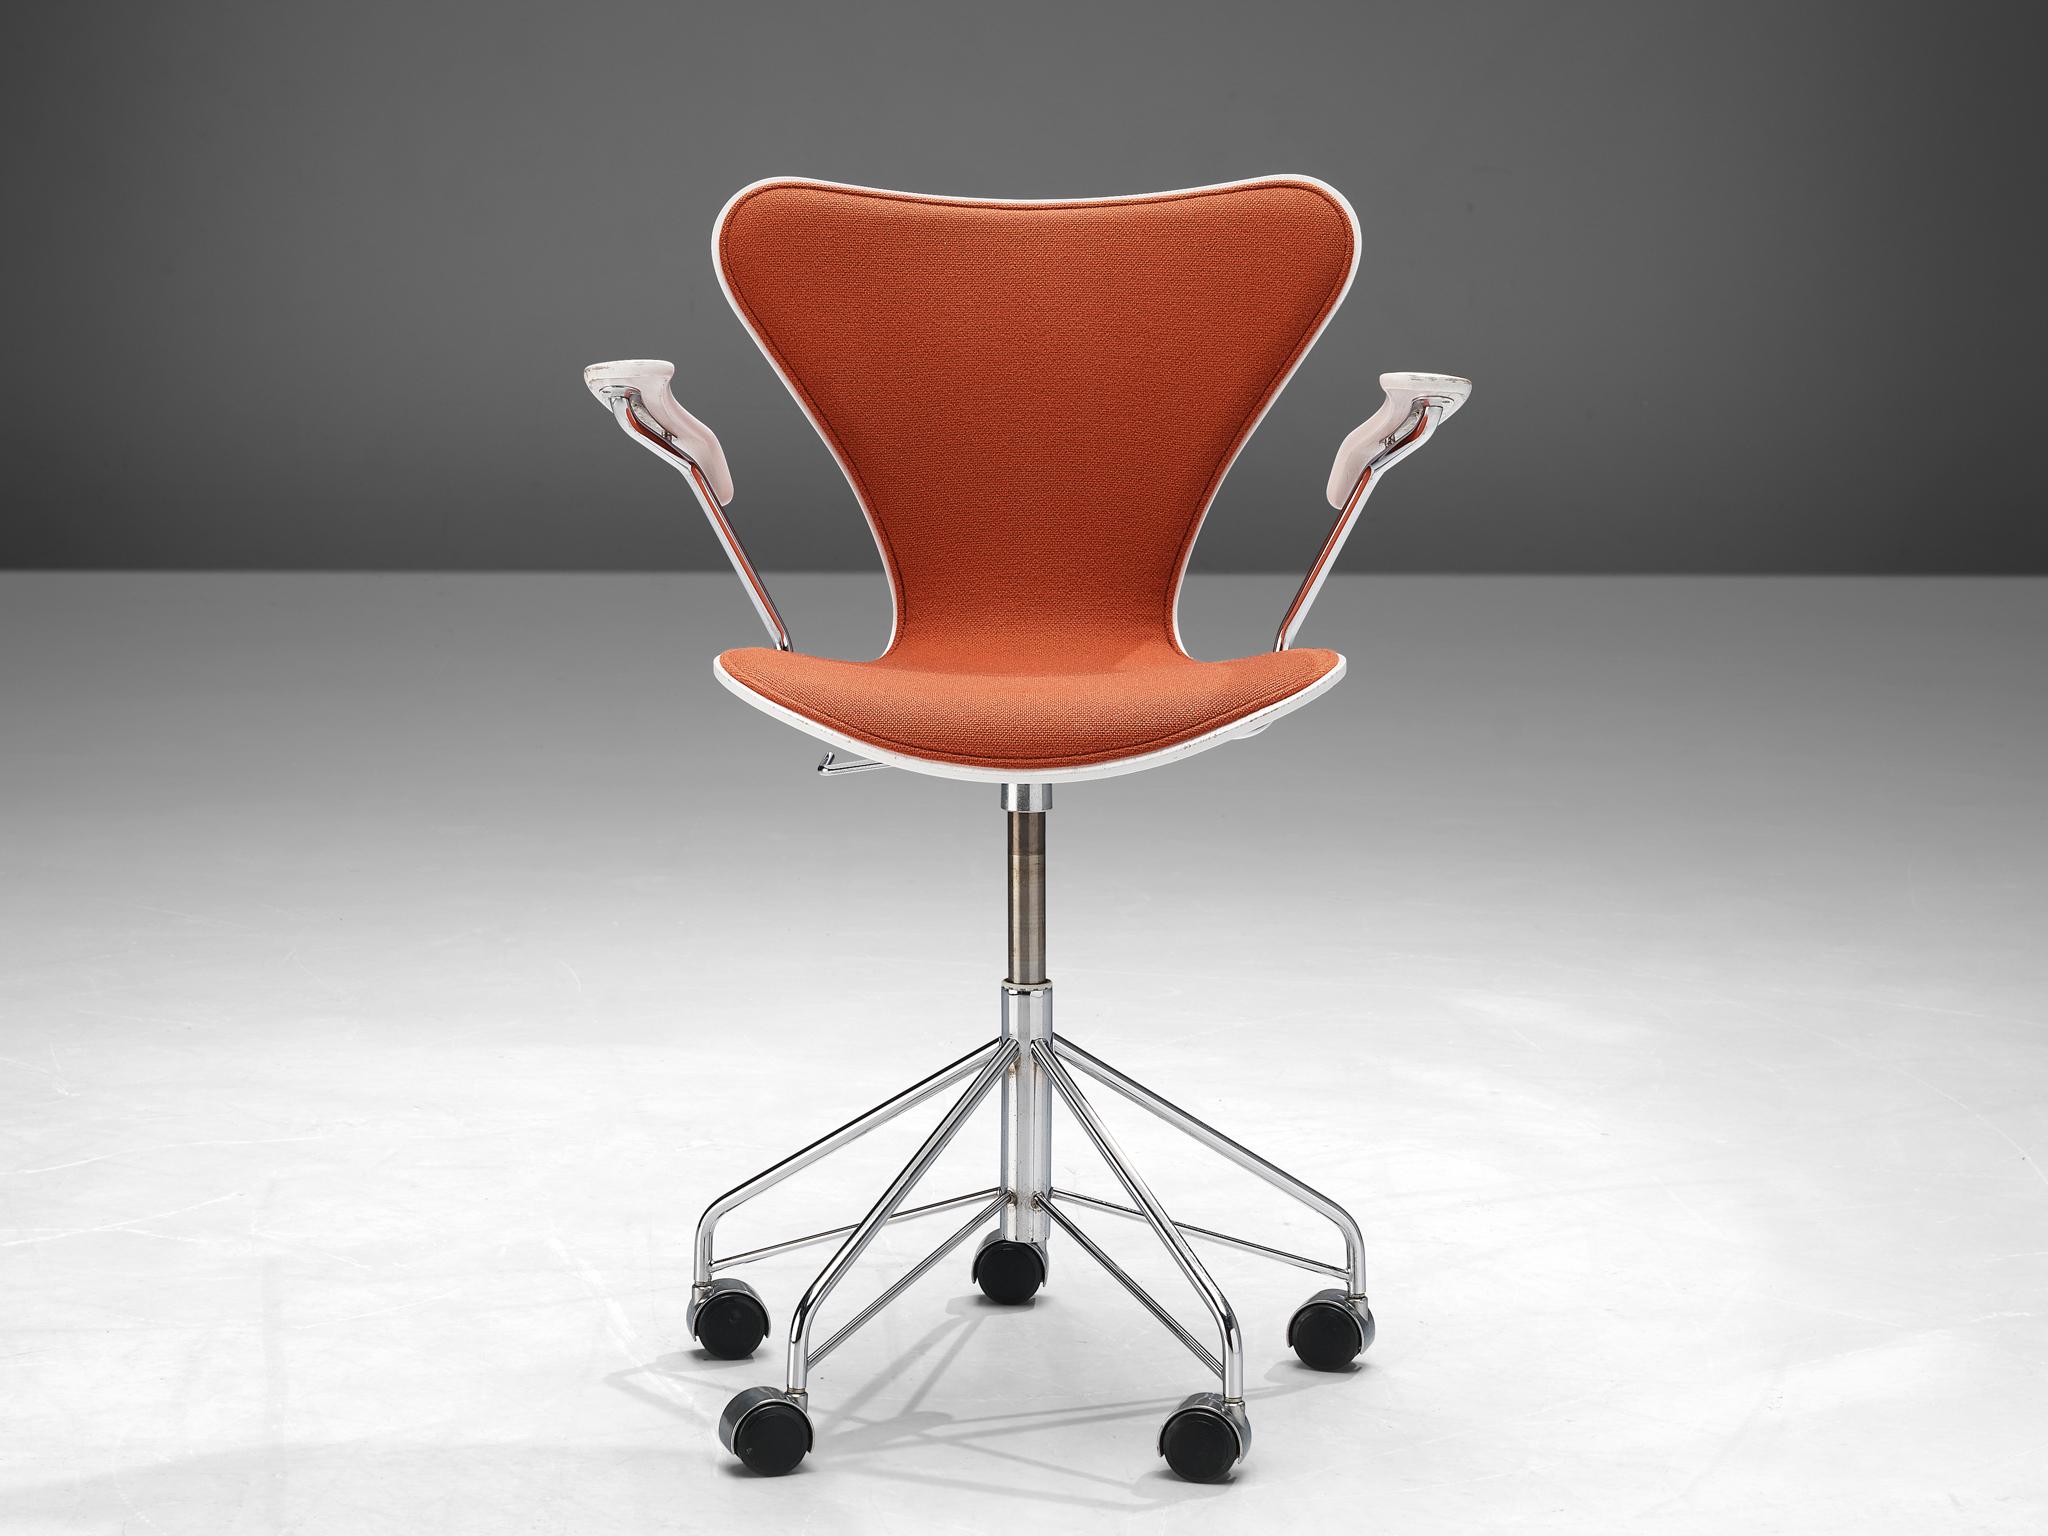 Arne Jacobsen for Fritz Hansen, office chair model ‘3217’, wood, fabric, chrome-plated metal, plastic, Denmark, designed in 1955, later production

This office chair by Arne Jacobsen is part of the series number 7 which he designed in 1955. The